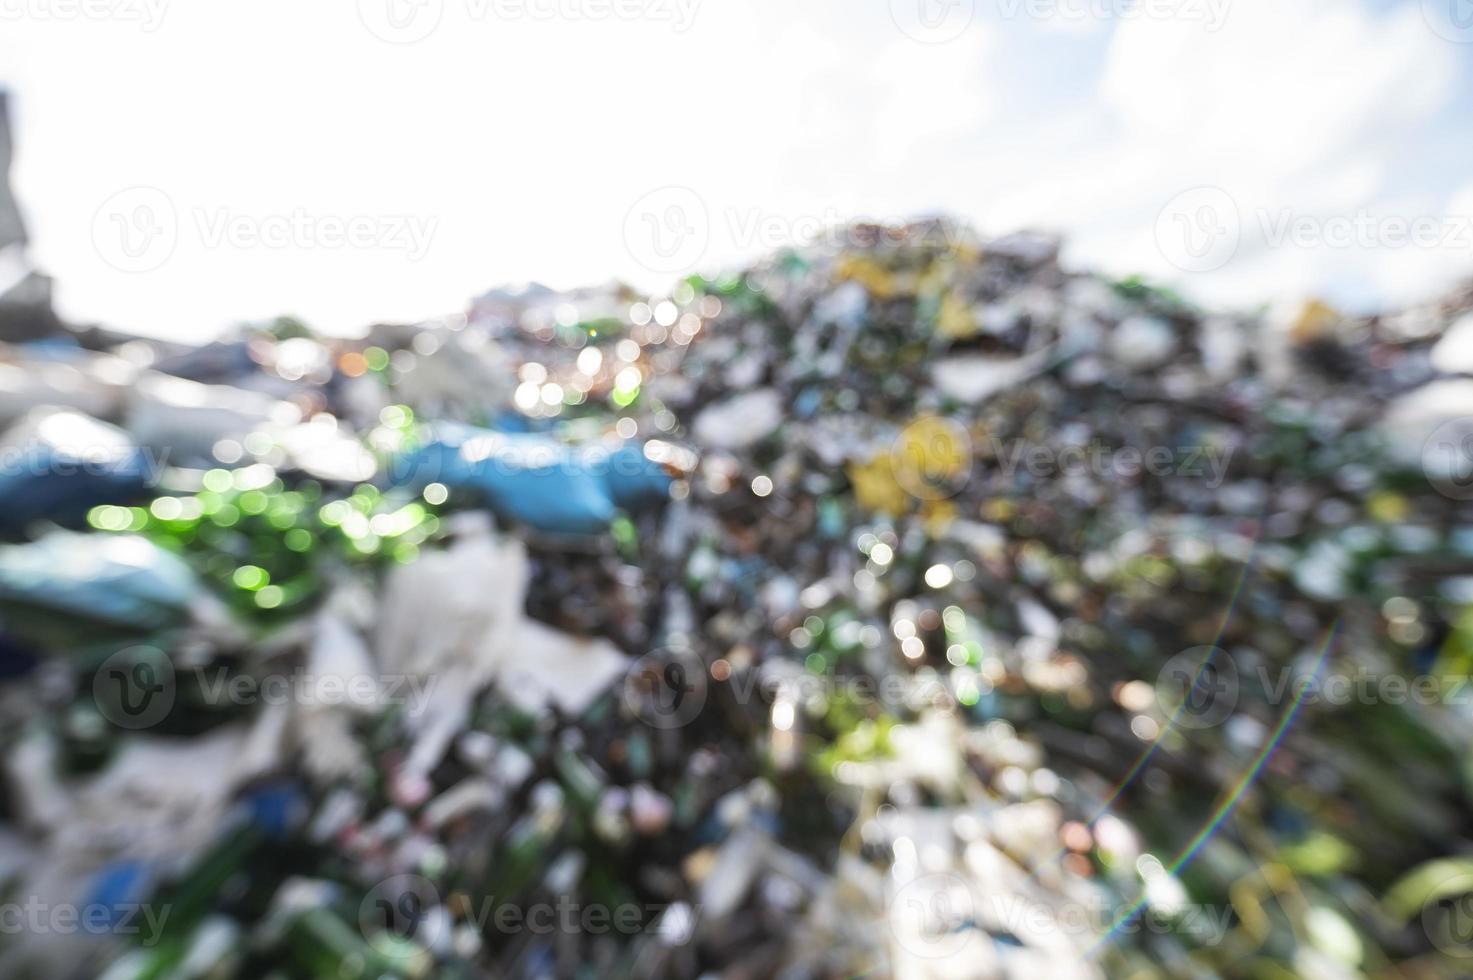 blurry image of garbage pile which covers the ecosystem of forests and fields Toxic to soil and water photo